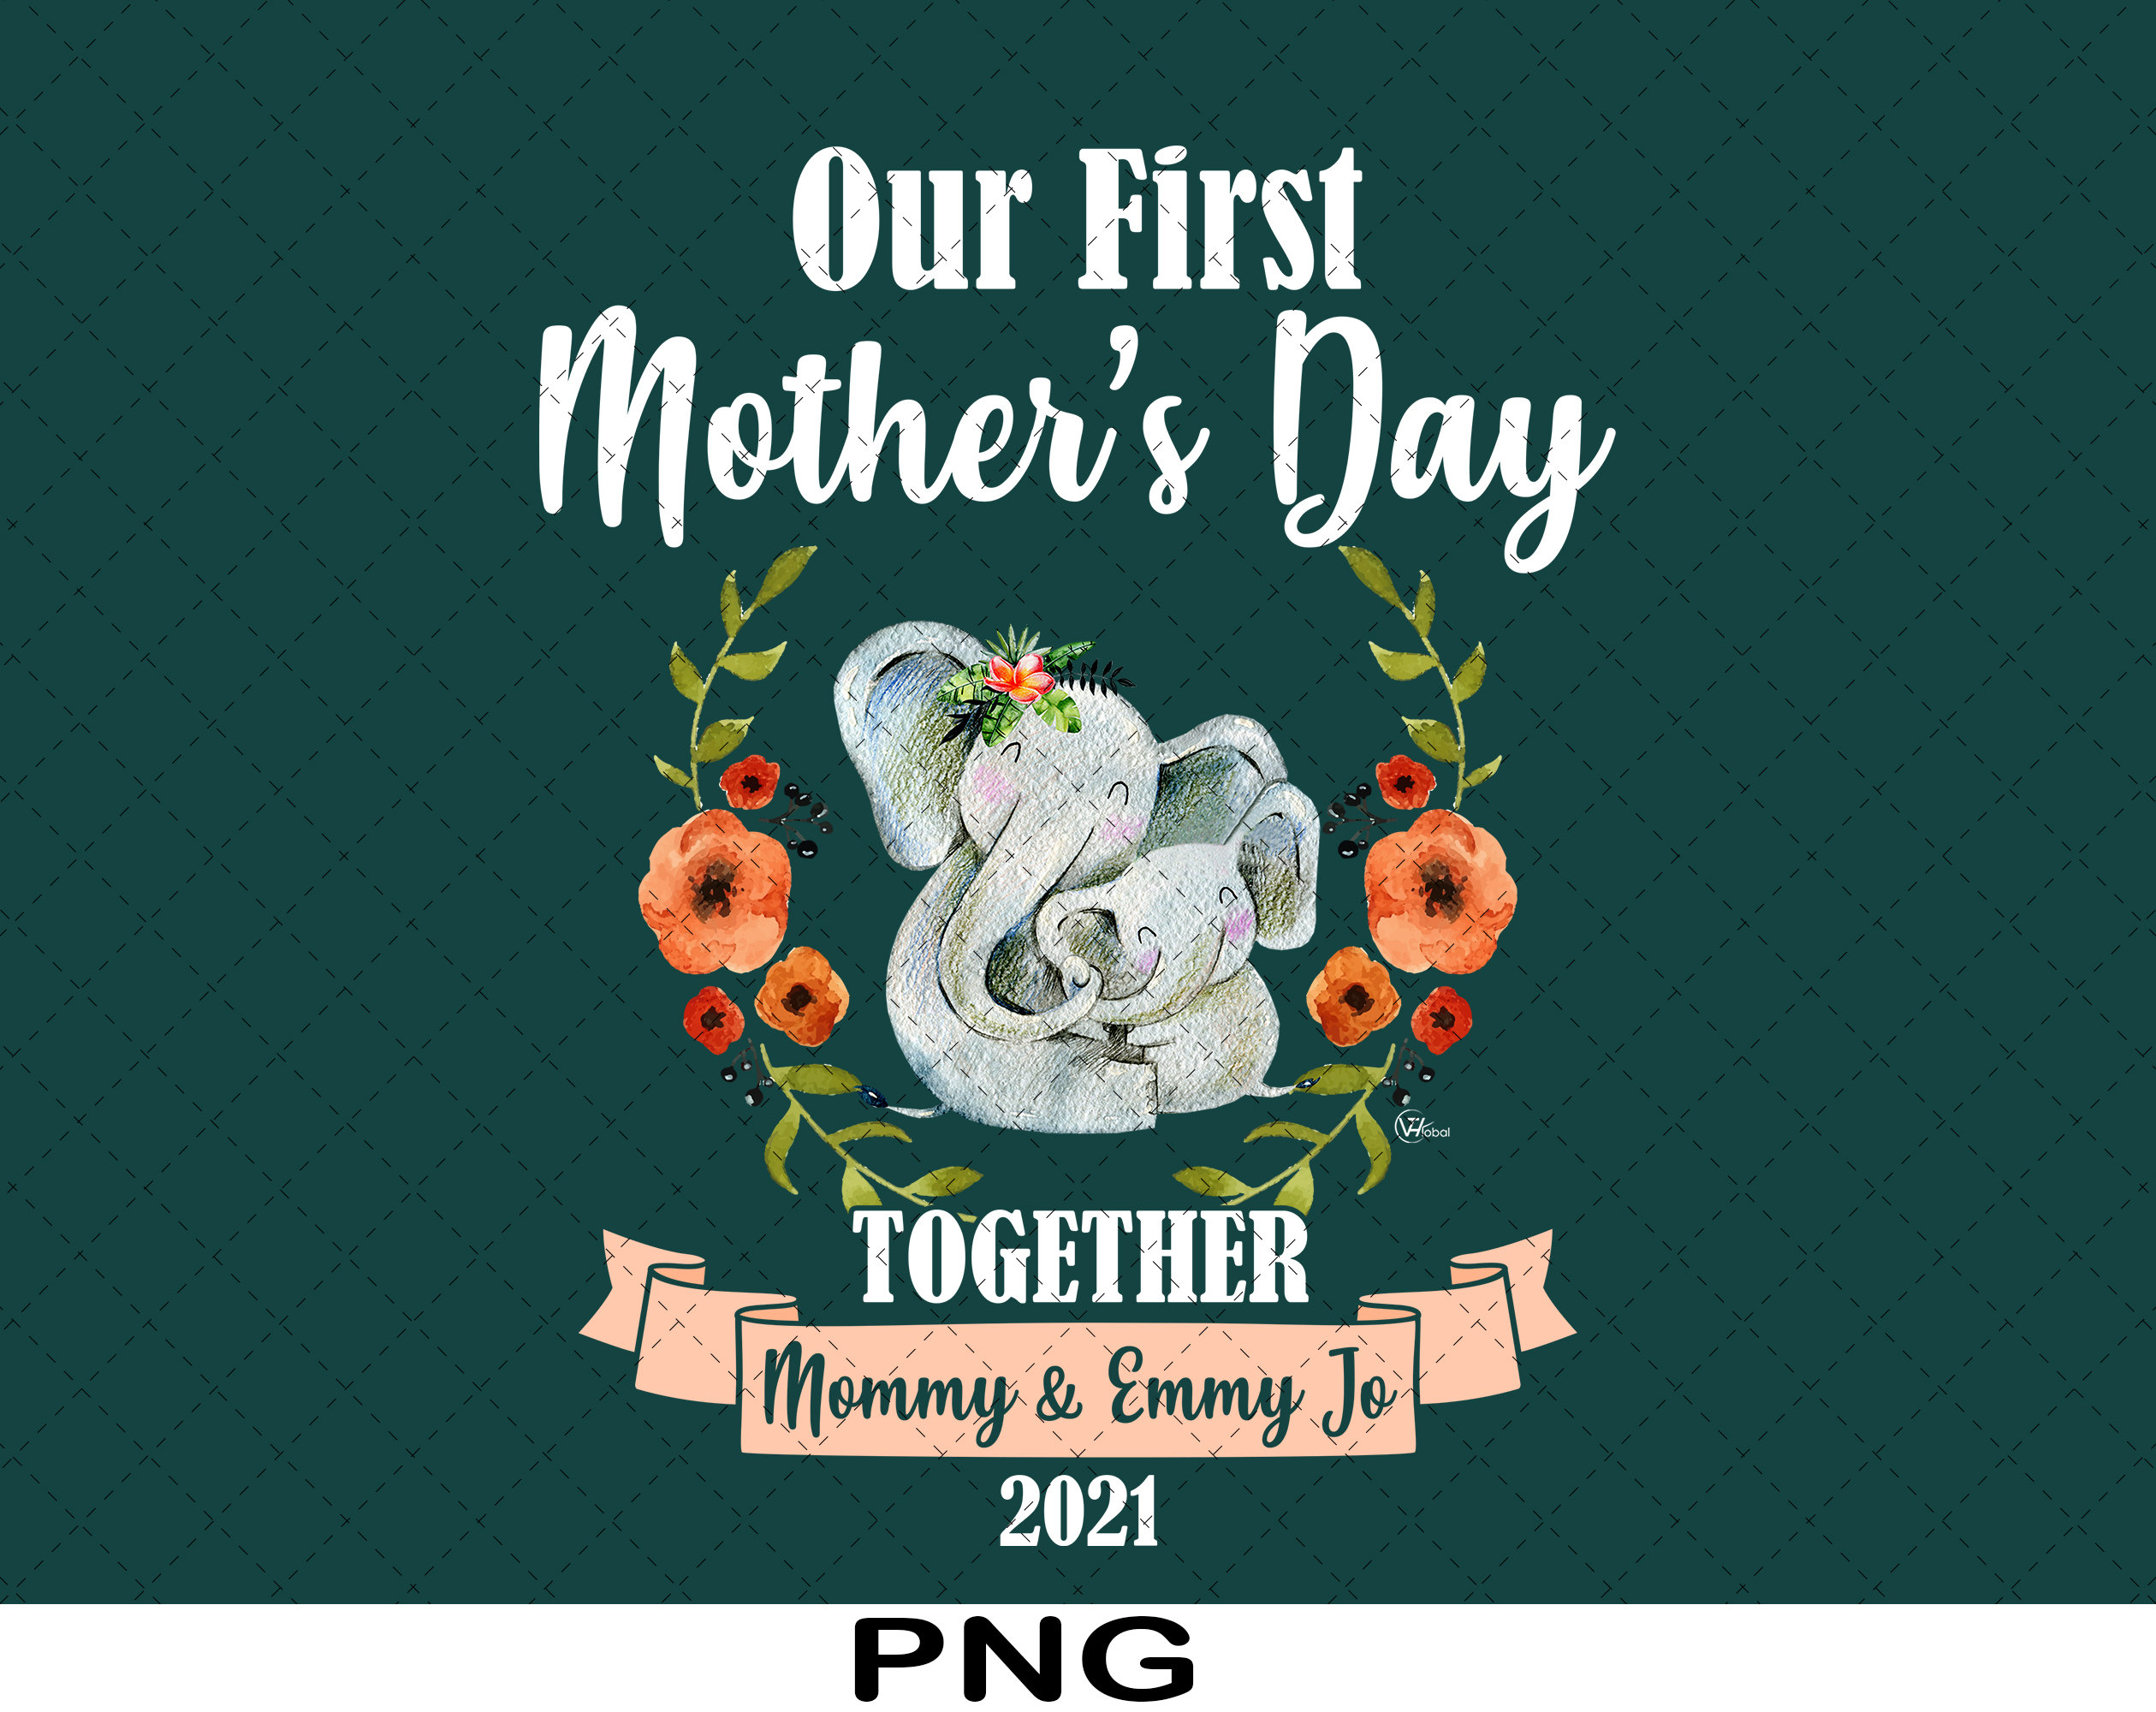 Our First Mother's Day PNG Together Mommy And Emmy Jo | Etsy